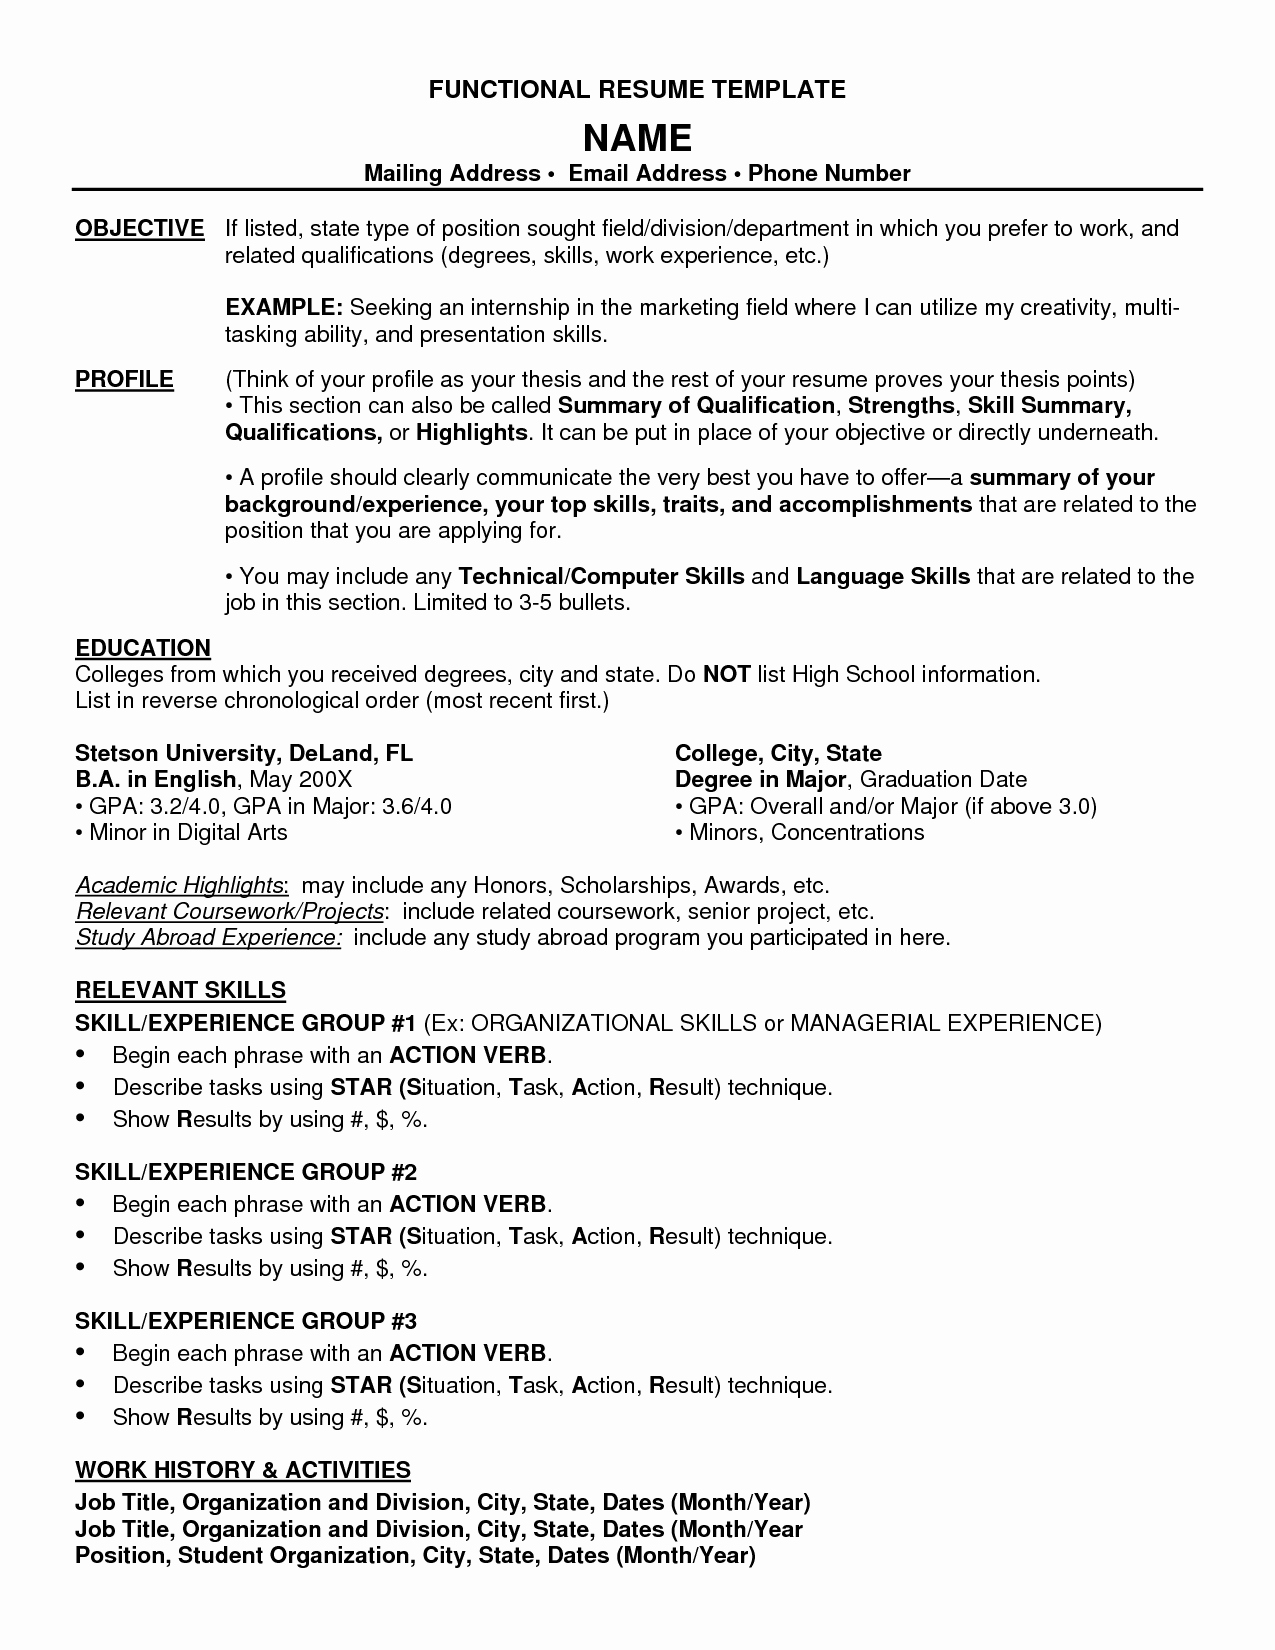 Functional Resume Templates